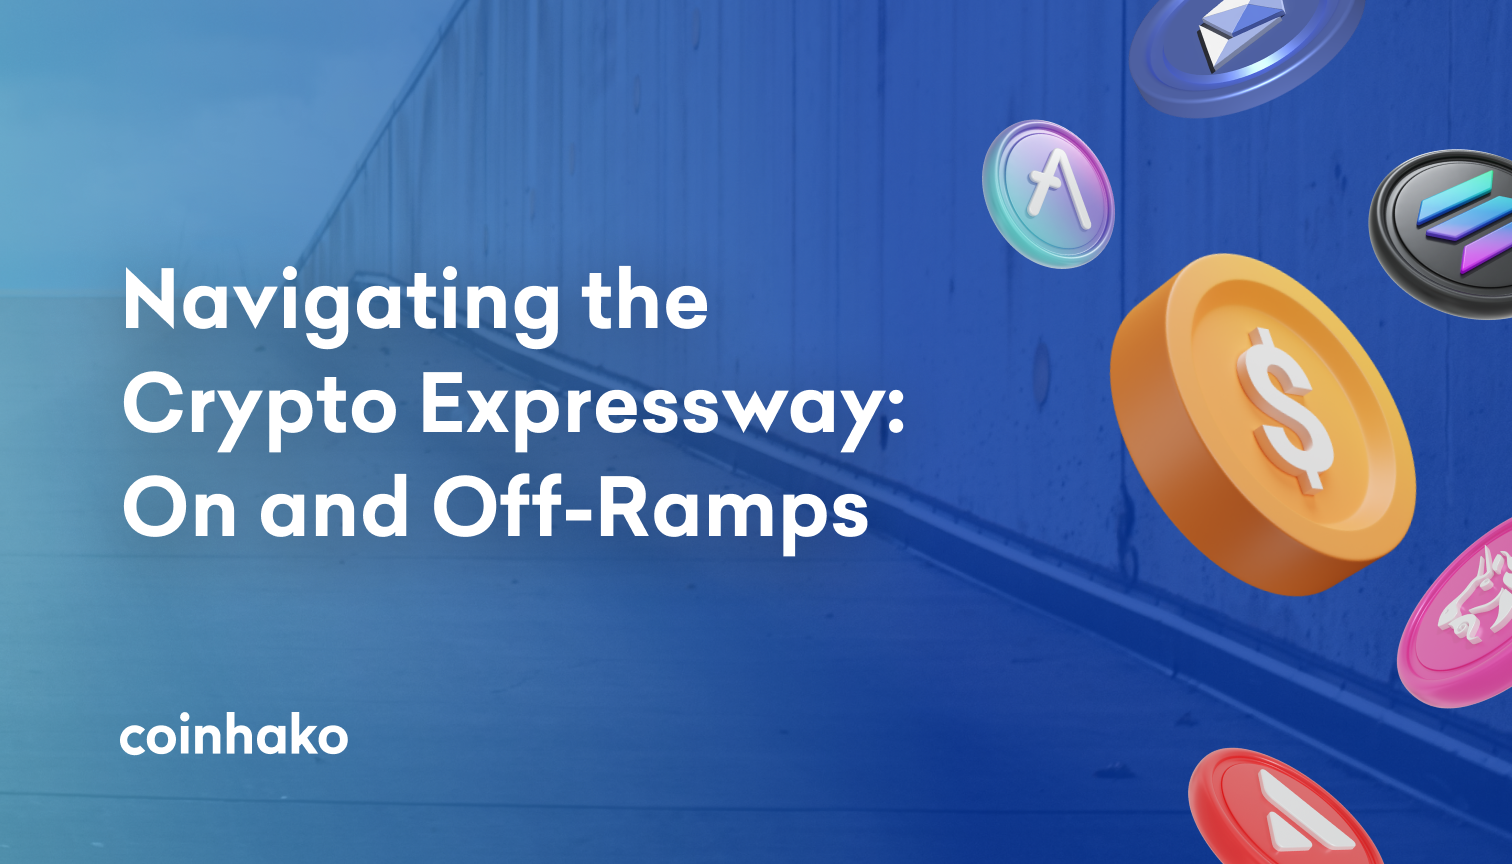 Navigating the Crypto Expressway: On-Ramps and Off-Ramps